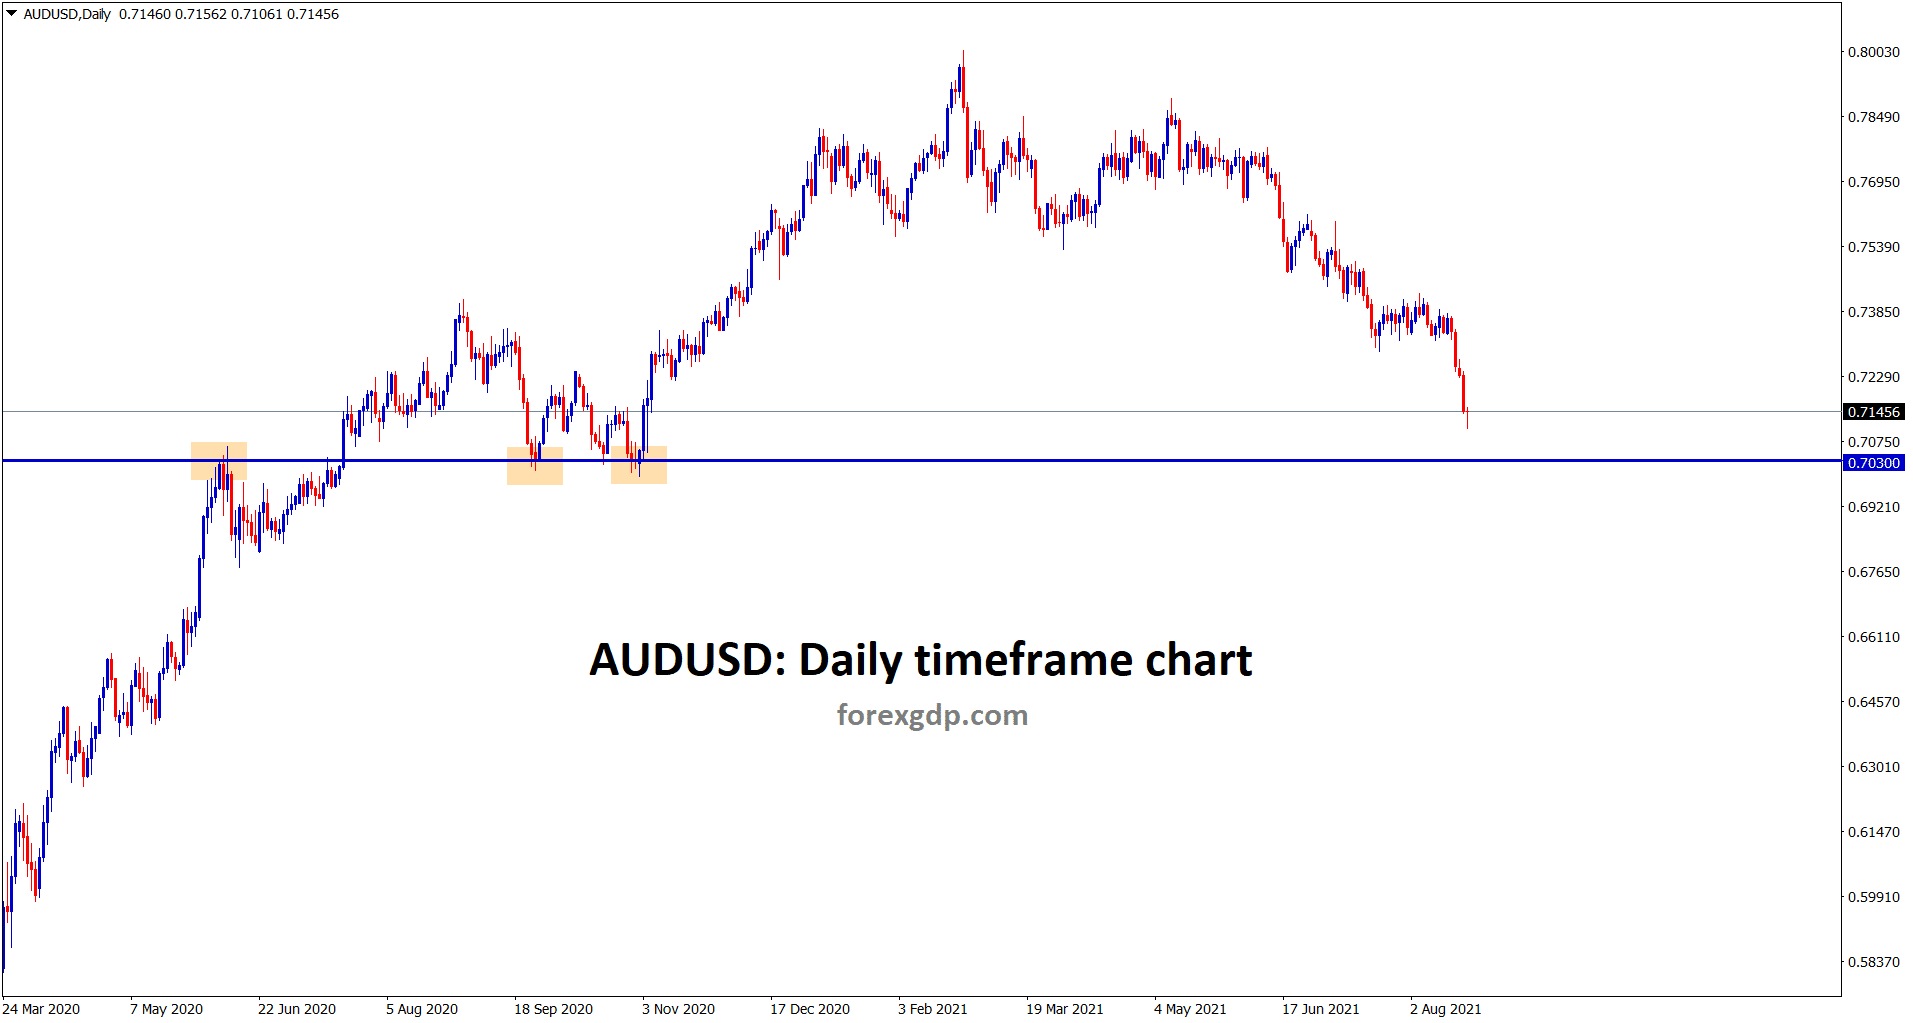 AUDUSD is falling continuously breaking the recent support areas the next support area is at 0.7030